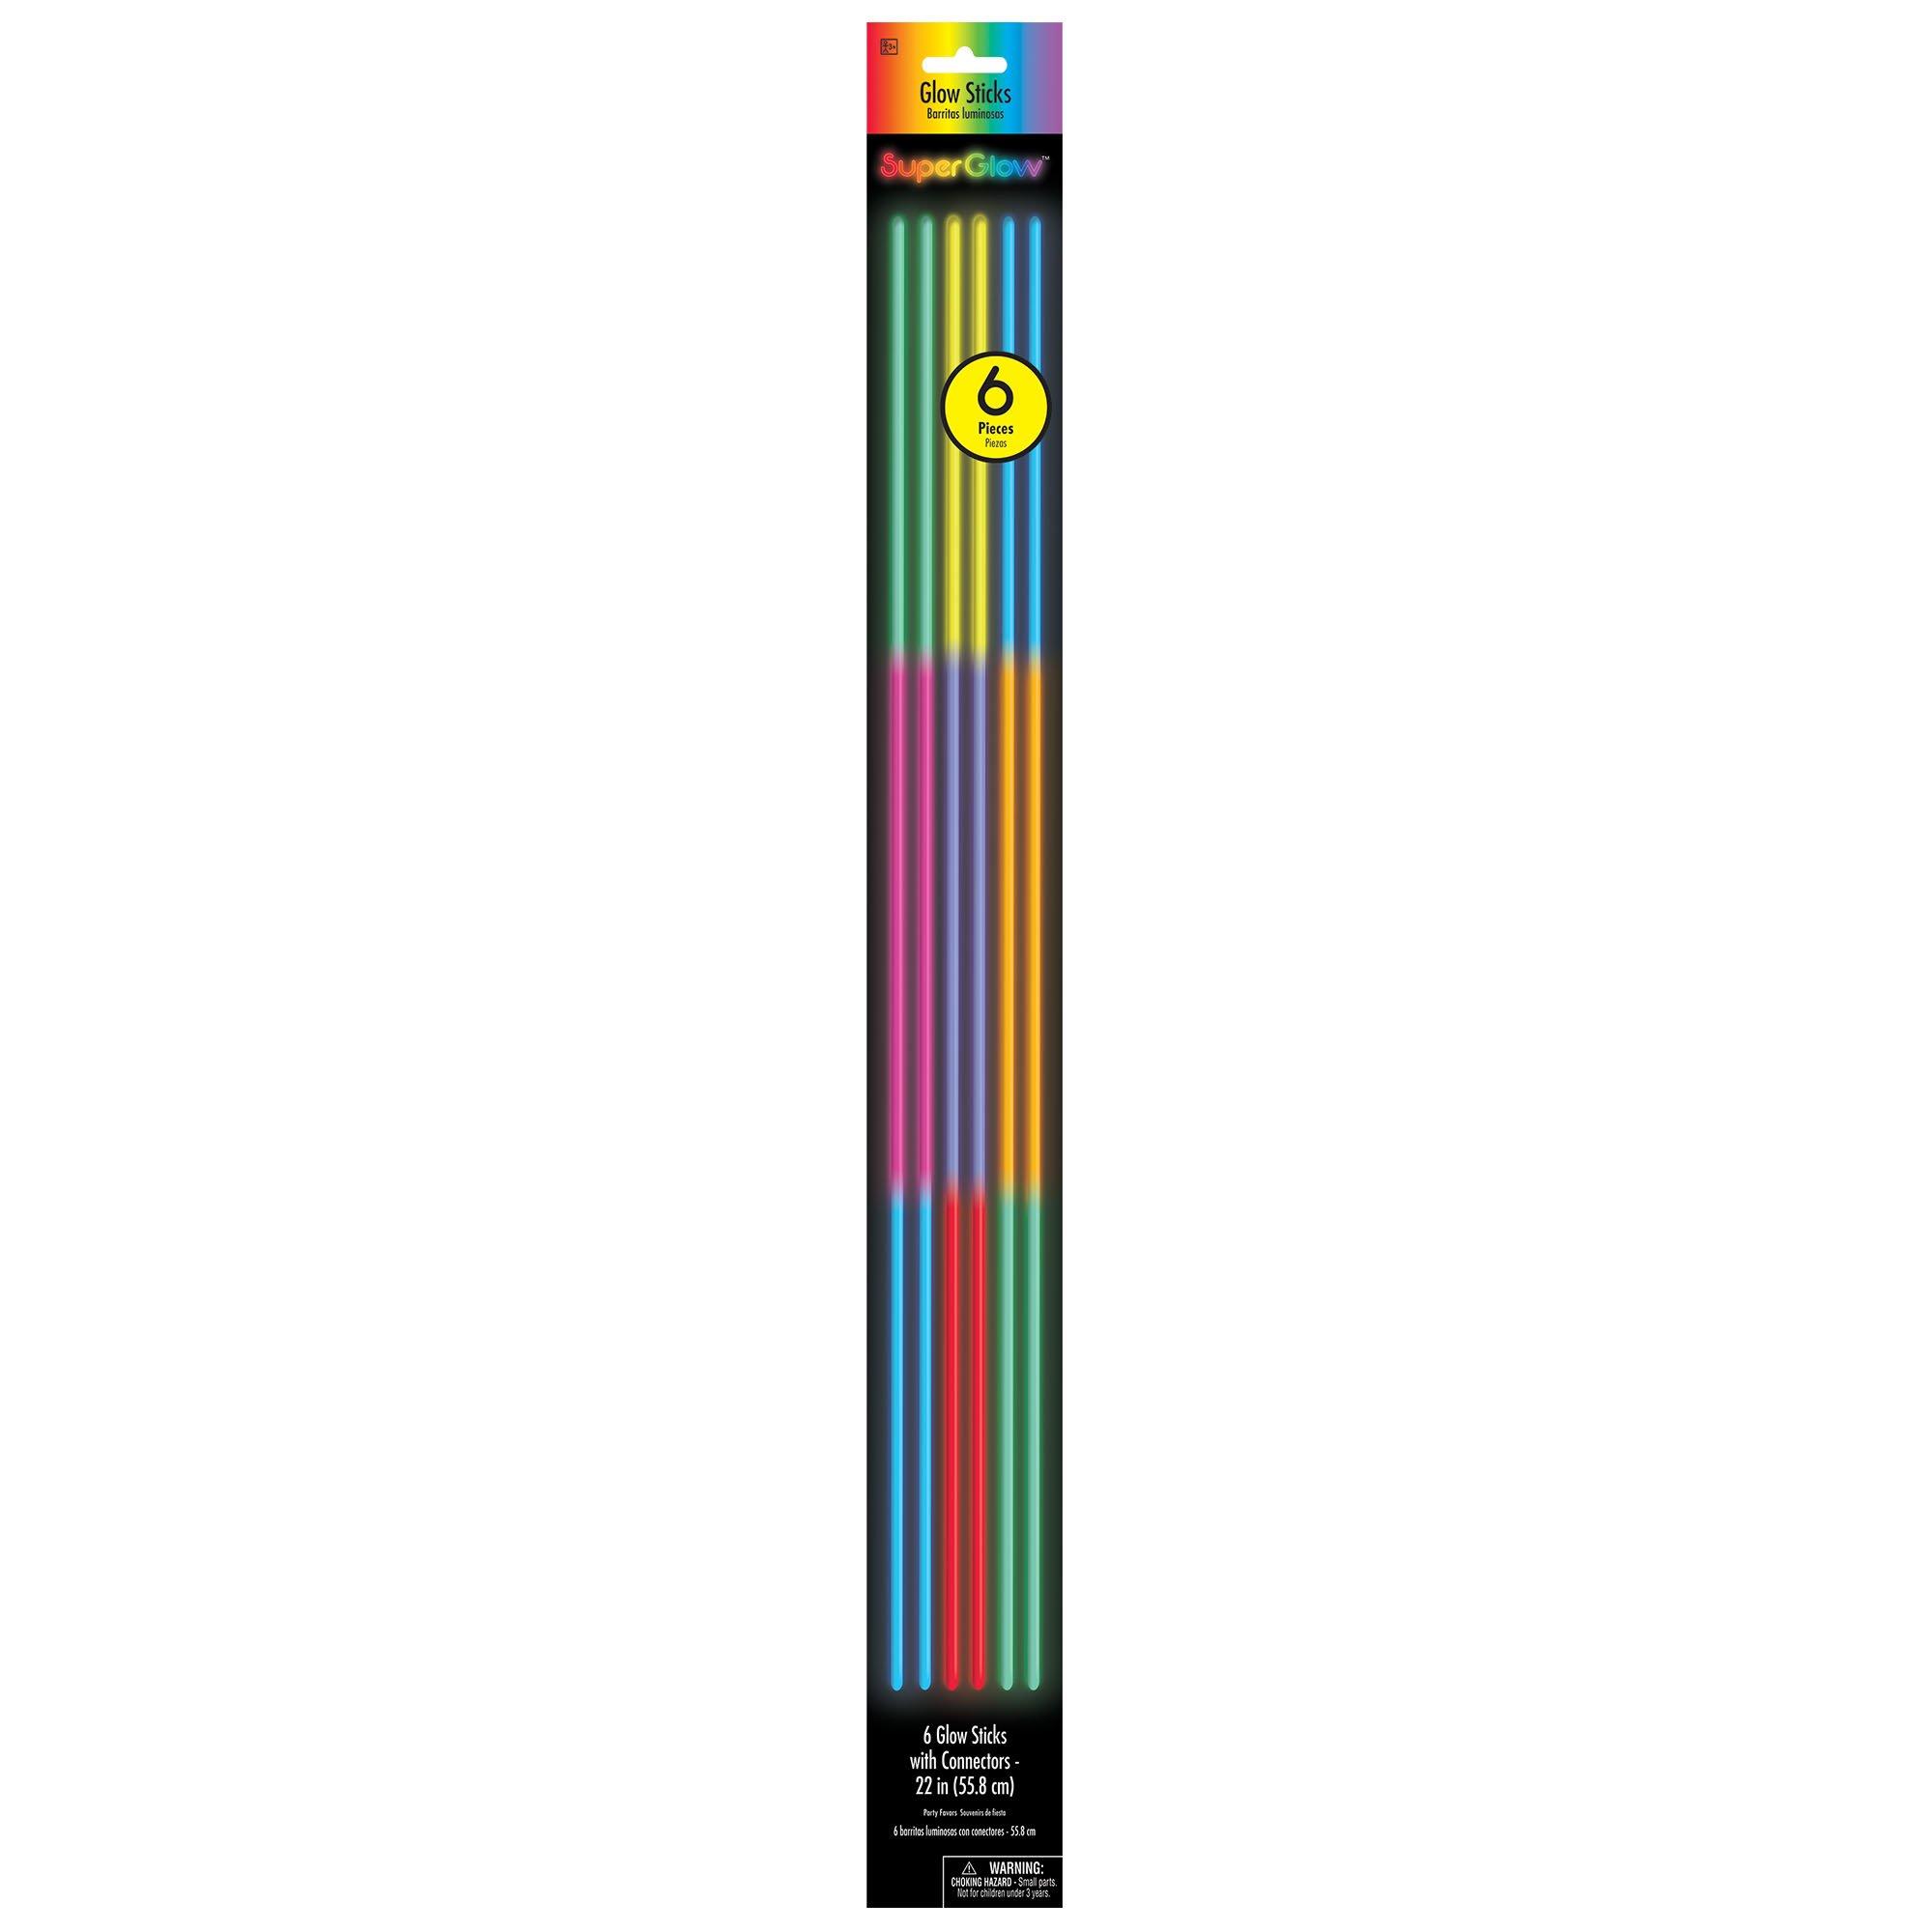 Pack of 567 Glow Sticks, 250 Glow Sticks + 250 Connectors + 67 Connectors  for Flower Balls and More - Party Favors for Kids/Adults 